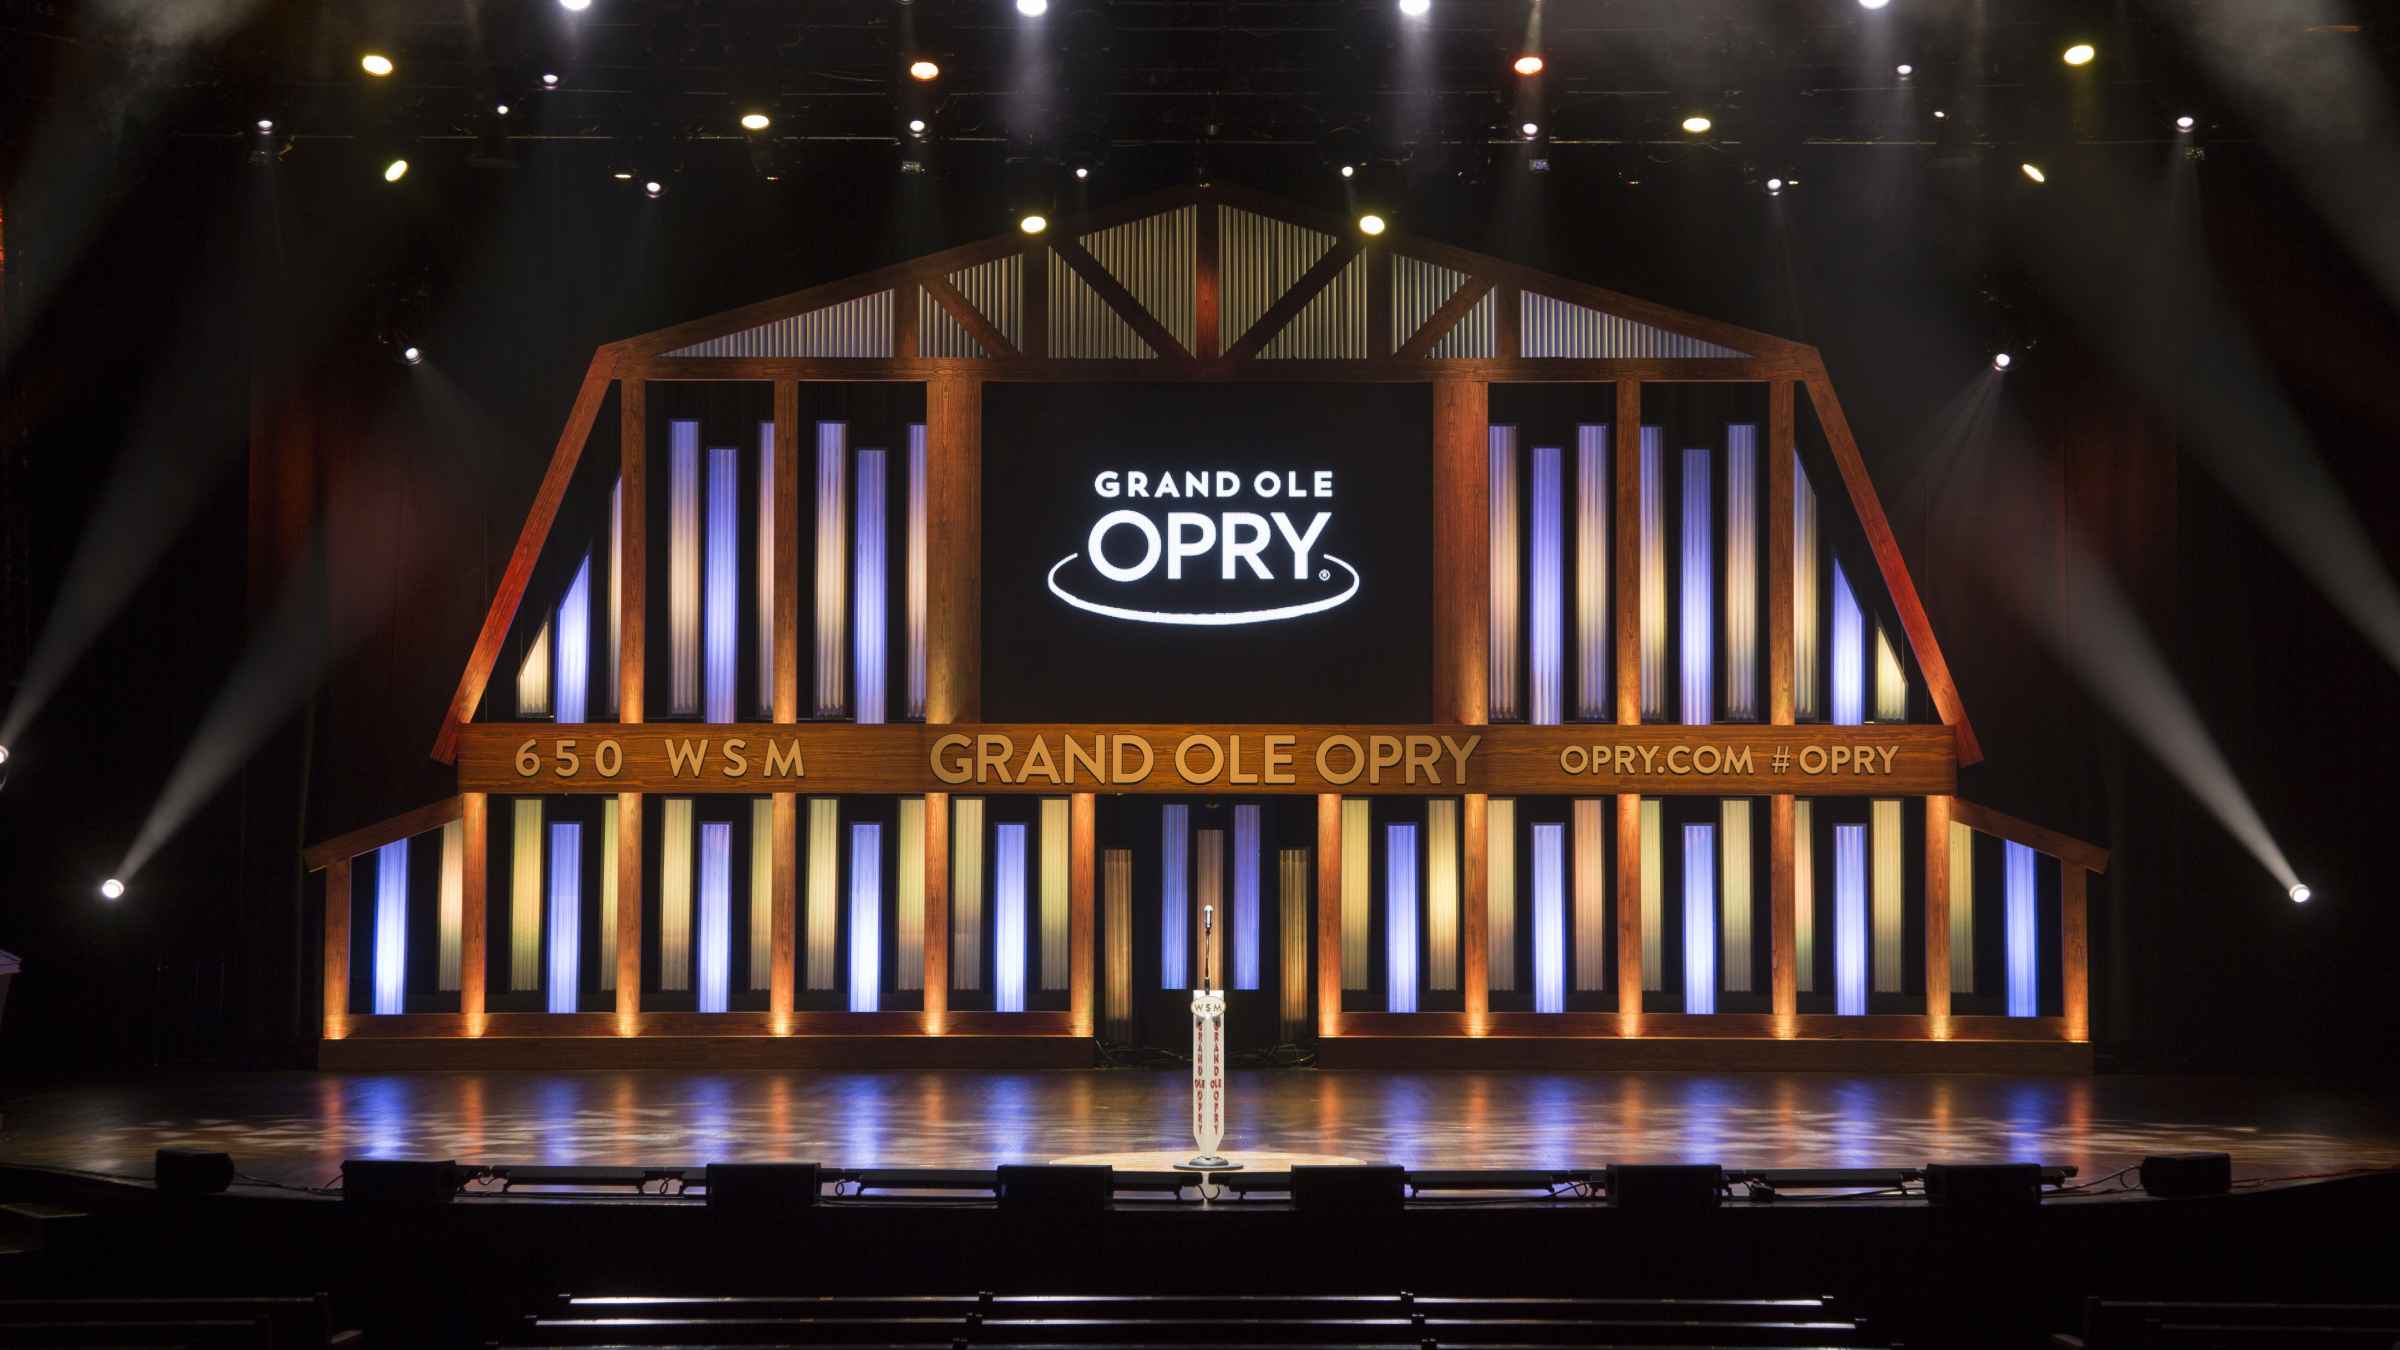 grand-ole-opry-nashville-book-tickets-tours-getyourguide